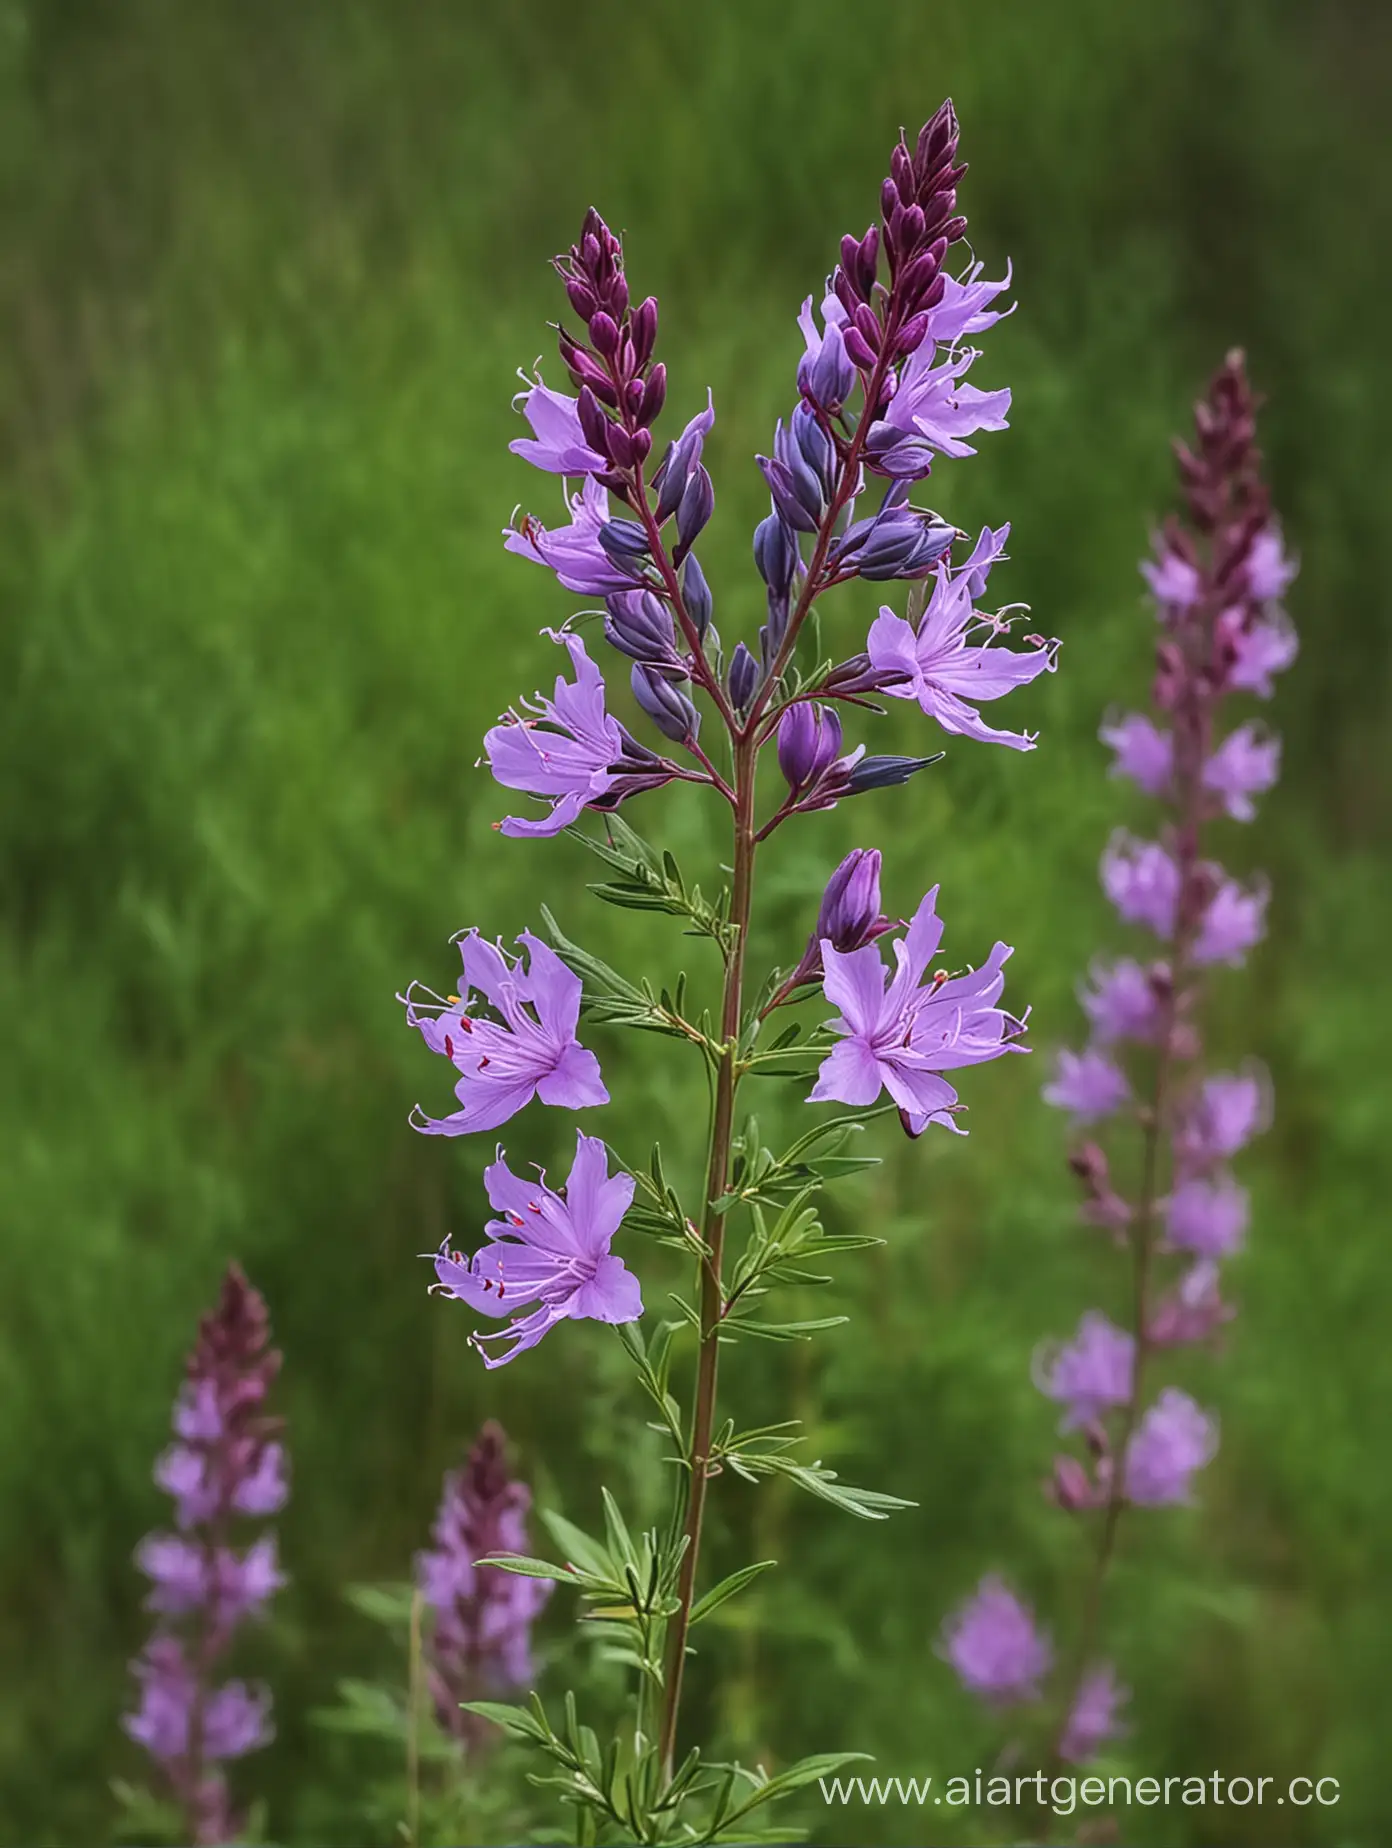 Vibrant-Fireweed-Wild-Blue-Flower-Blooming-in-Natural-Setting